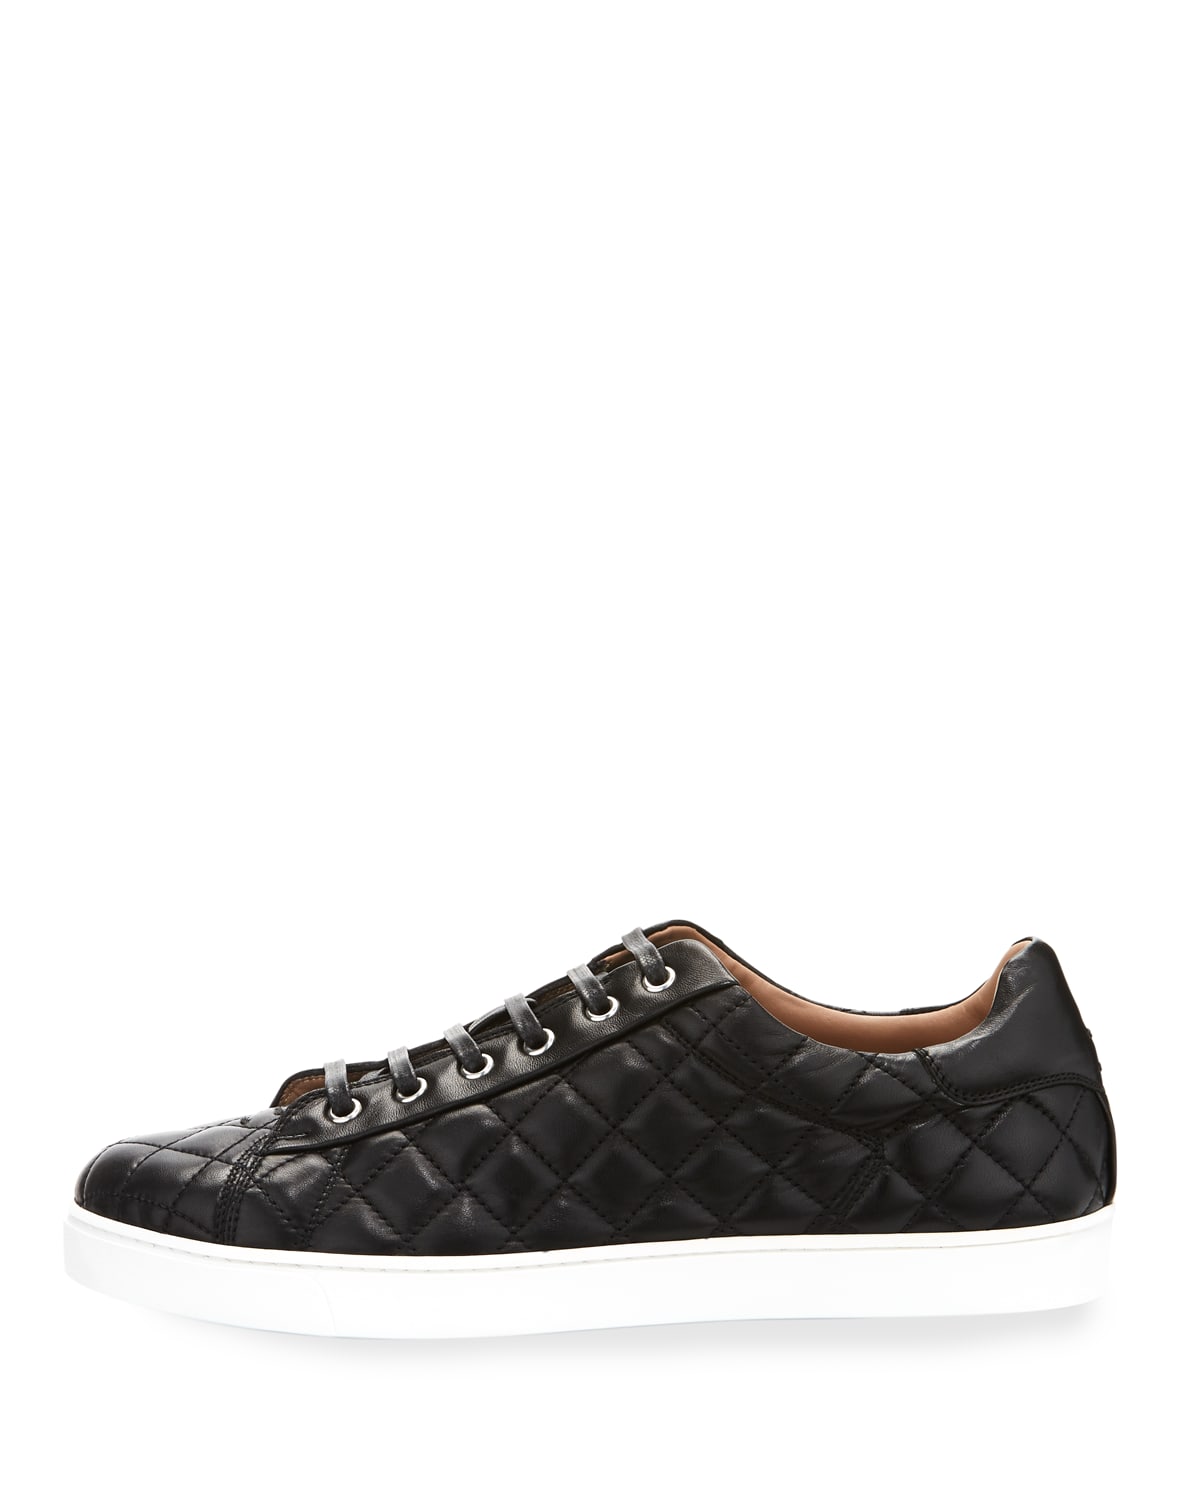 Gianvito Rossi Men's Quilted Leather Low-Top Sneakers, Black (Nero 